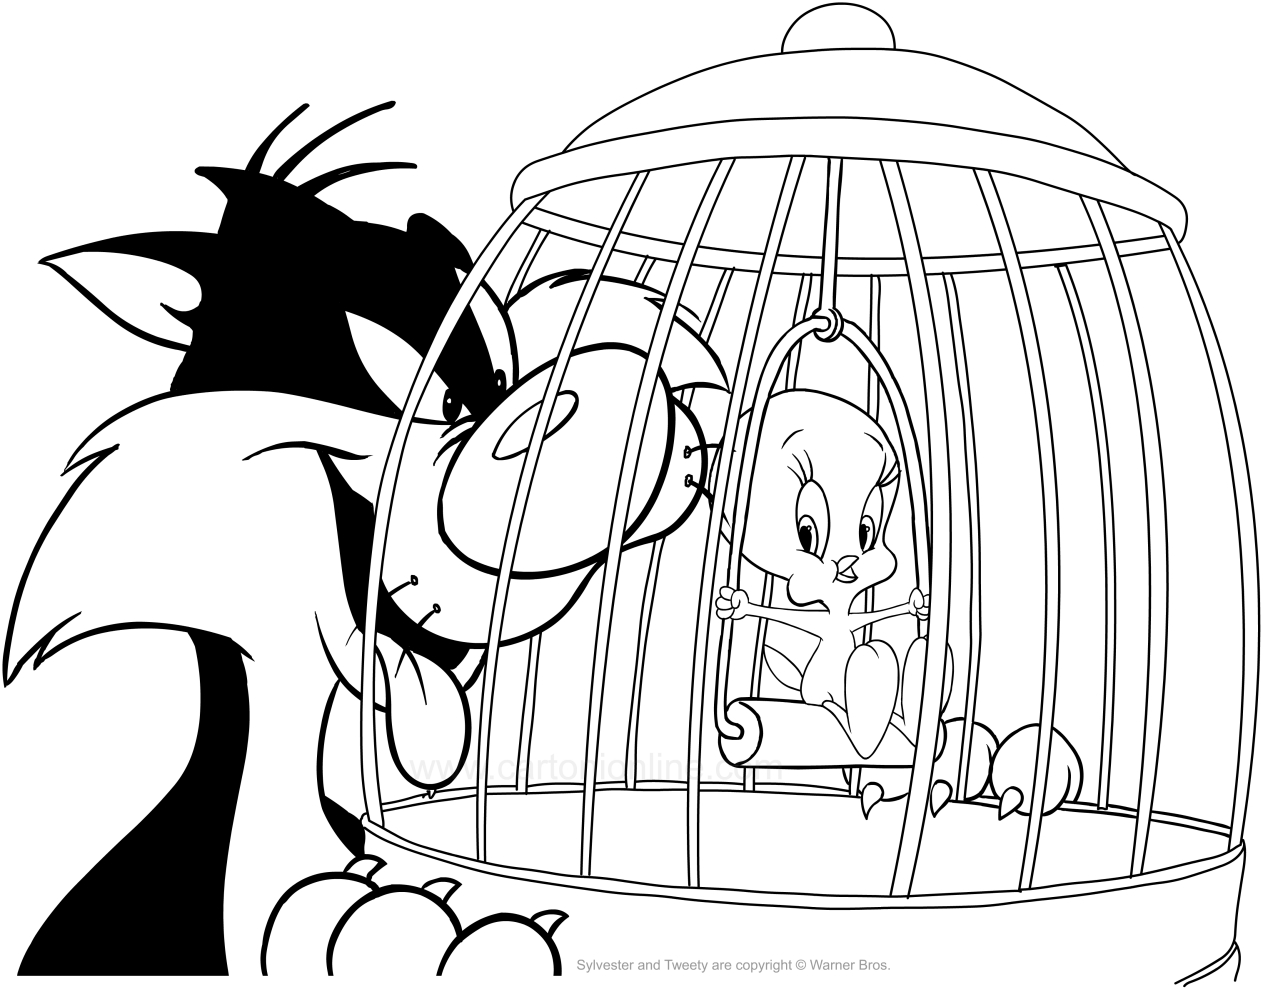 Drawing Sylvester trying to capture Tweety coloring pages printable for kids